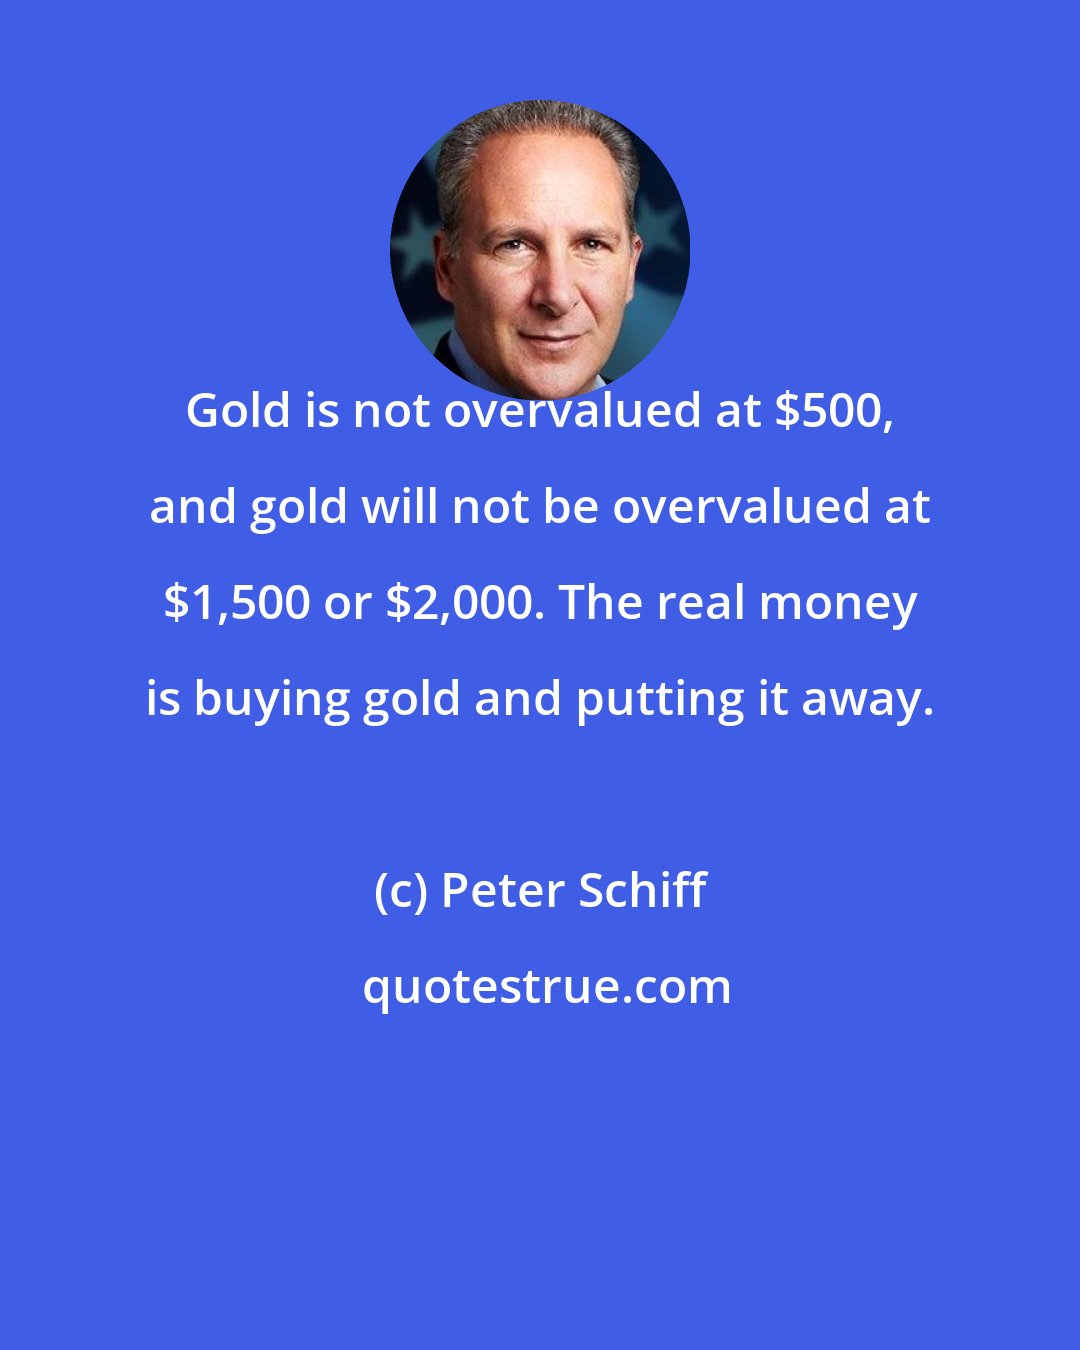 Peter Schiff: Gold is not overvalued at $500, and gold will not be overvalued at $1,500 or $2,000. The real money is buying gold and putting it away.